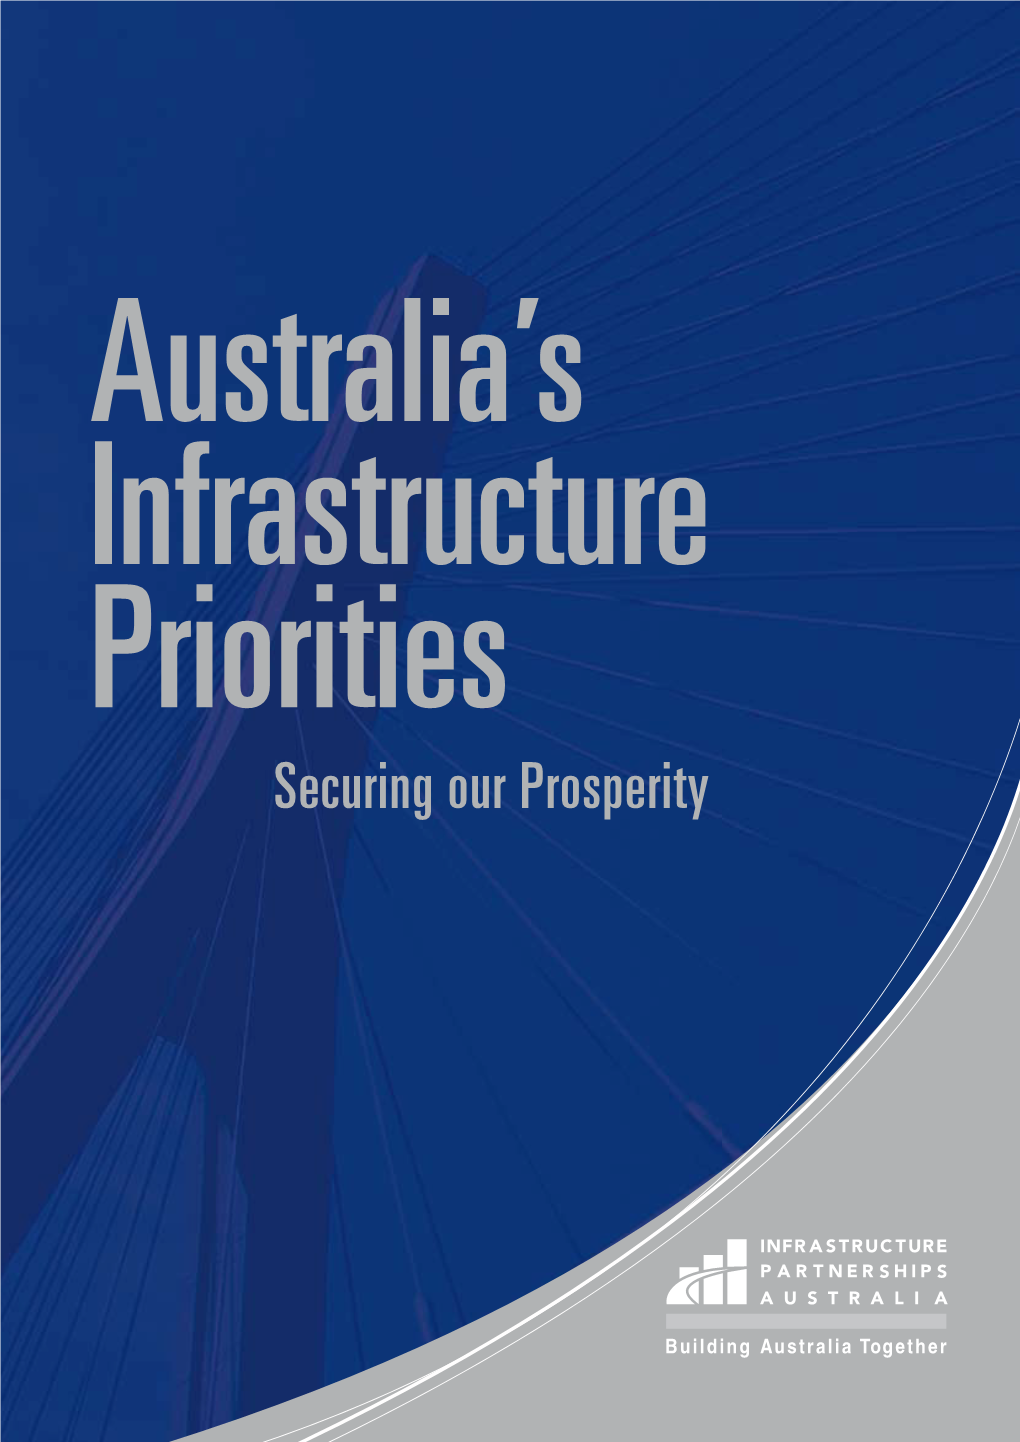 Securing Our Prosperity Infrastructure Partnerships Australia (Including Auscid) – Leading the National Debate on Infrastructure